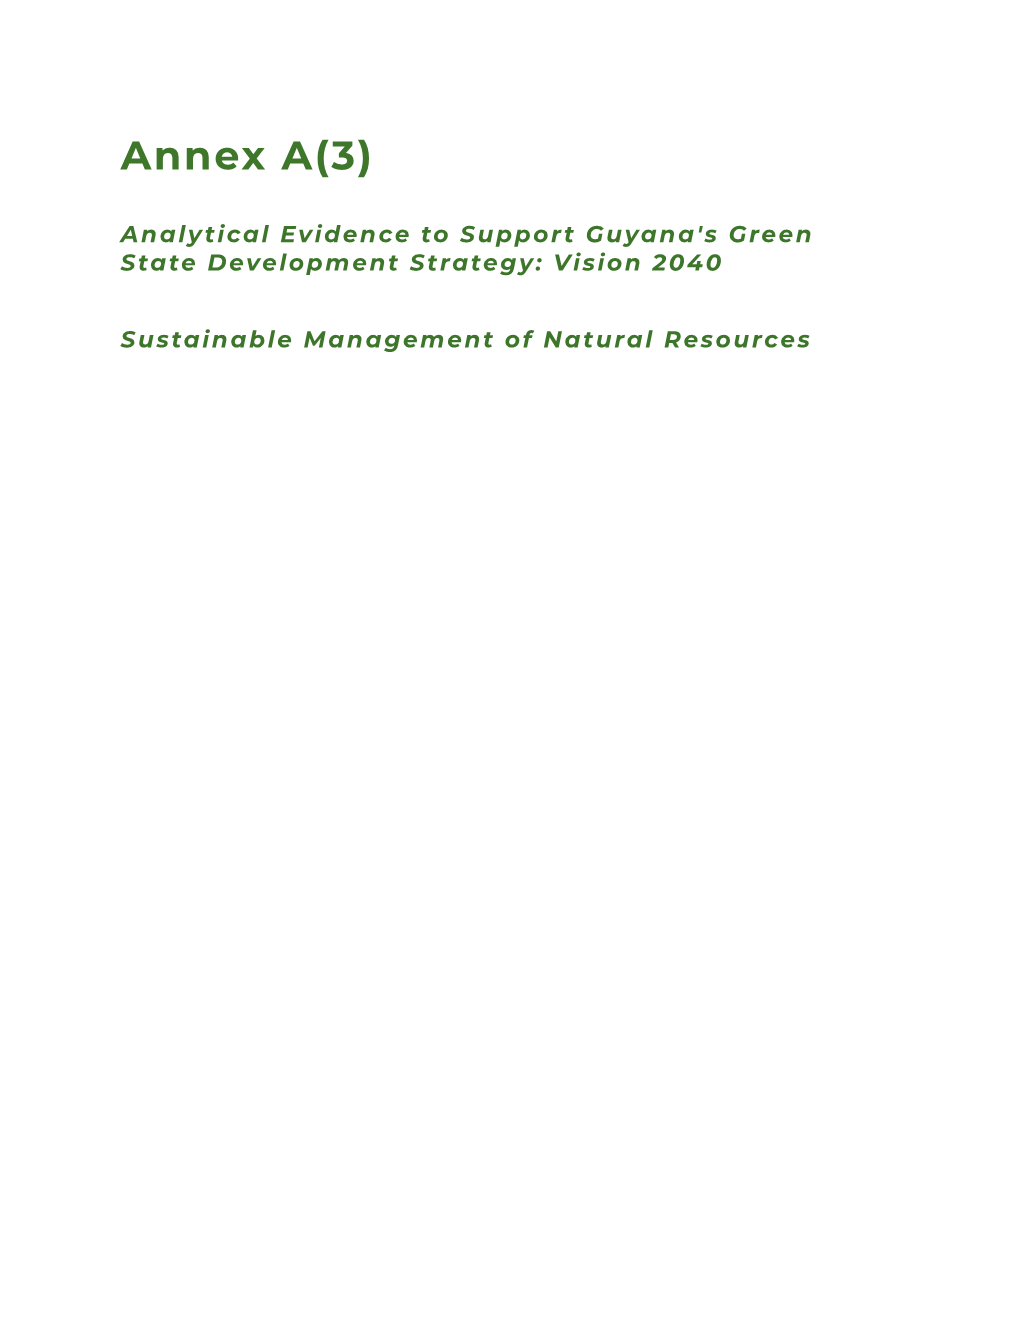 Annex A(3) Sustainable Management of Natural Resources A3 | Ii | Page Green State Development Strategy: Vision 2040